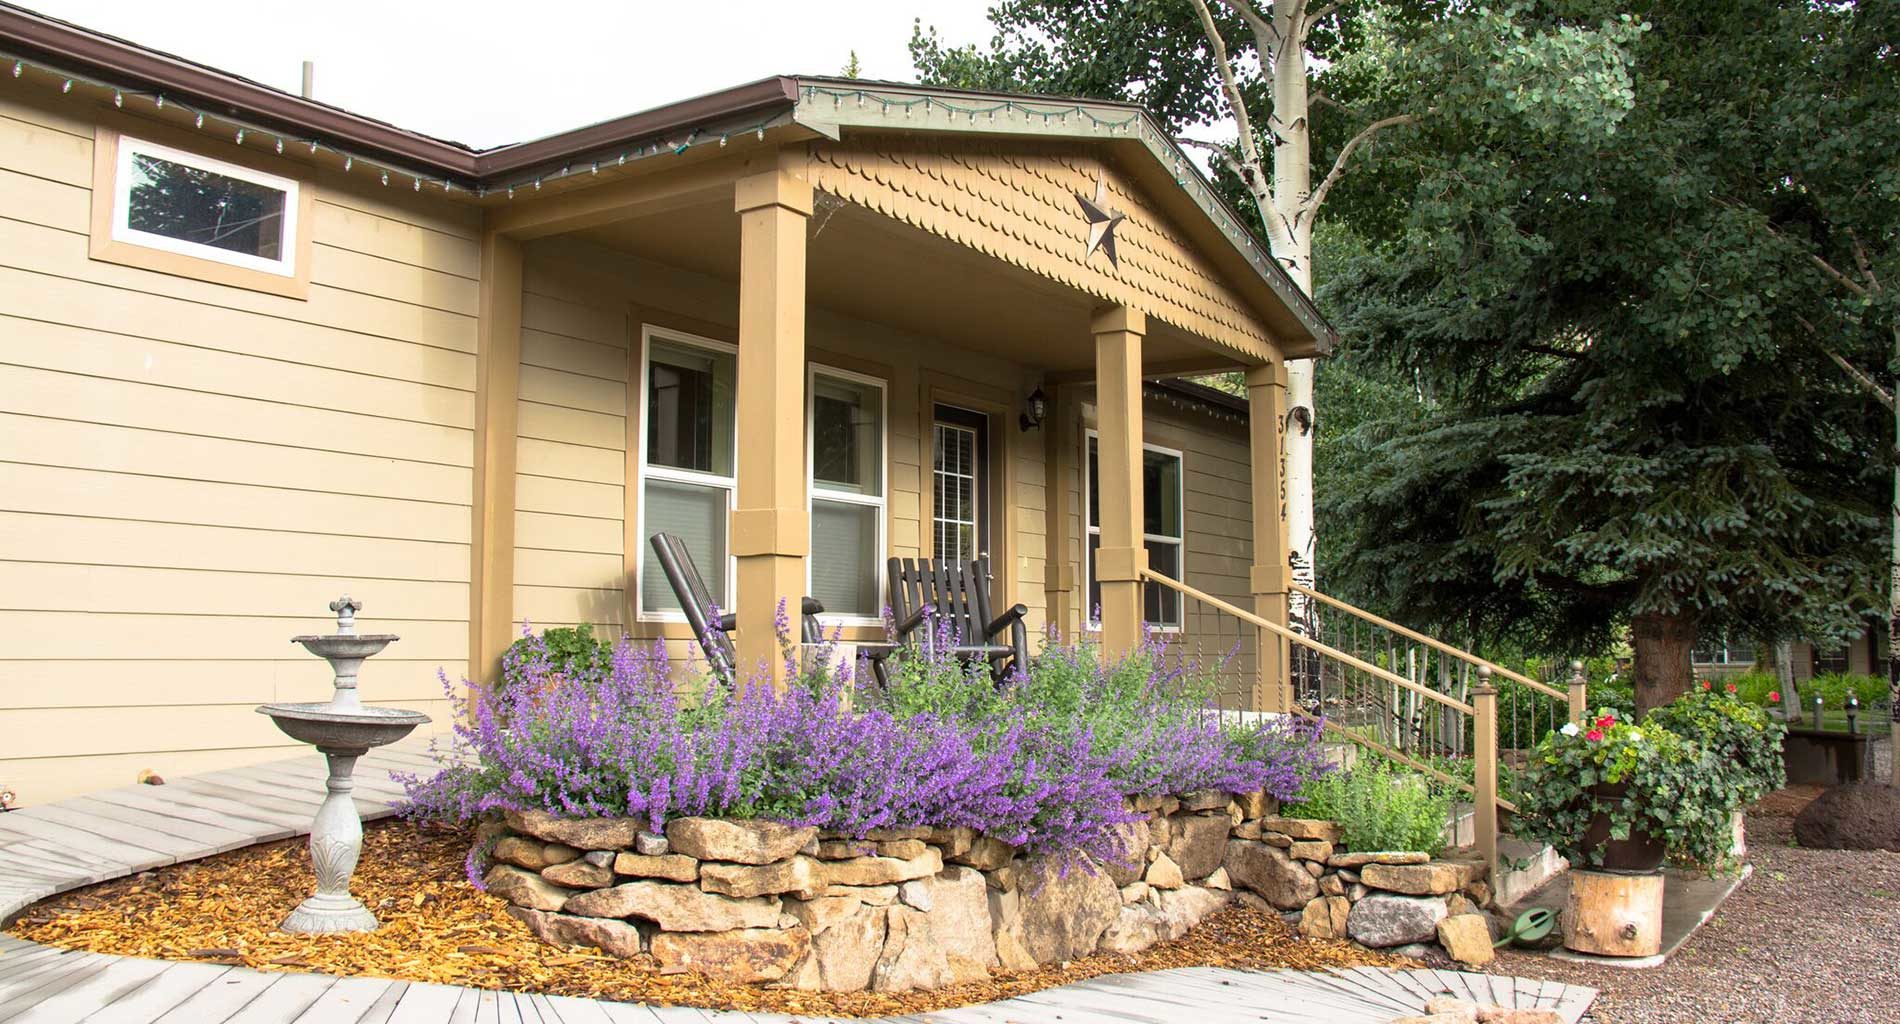 Exterior view of cabin featuring rock wall garden and lavender purples and luscious trees in background.